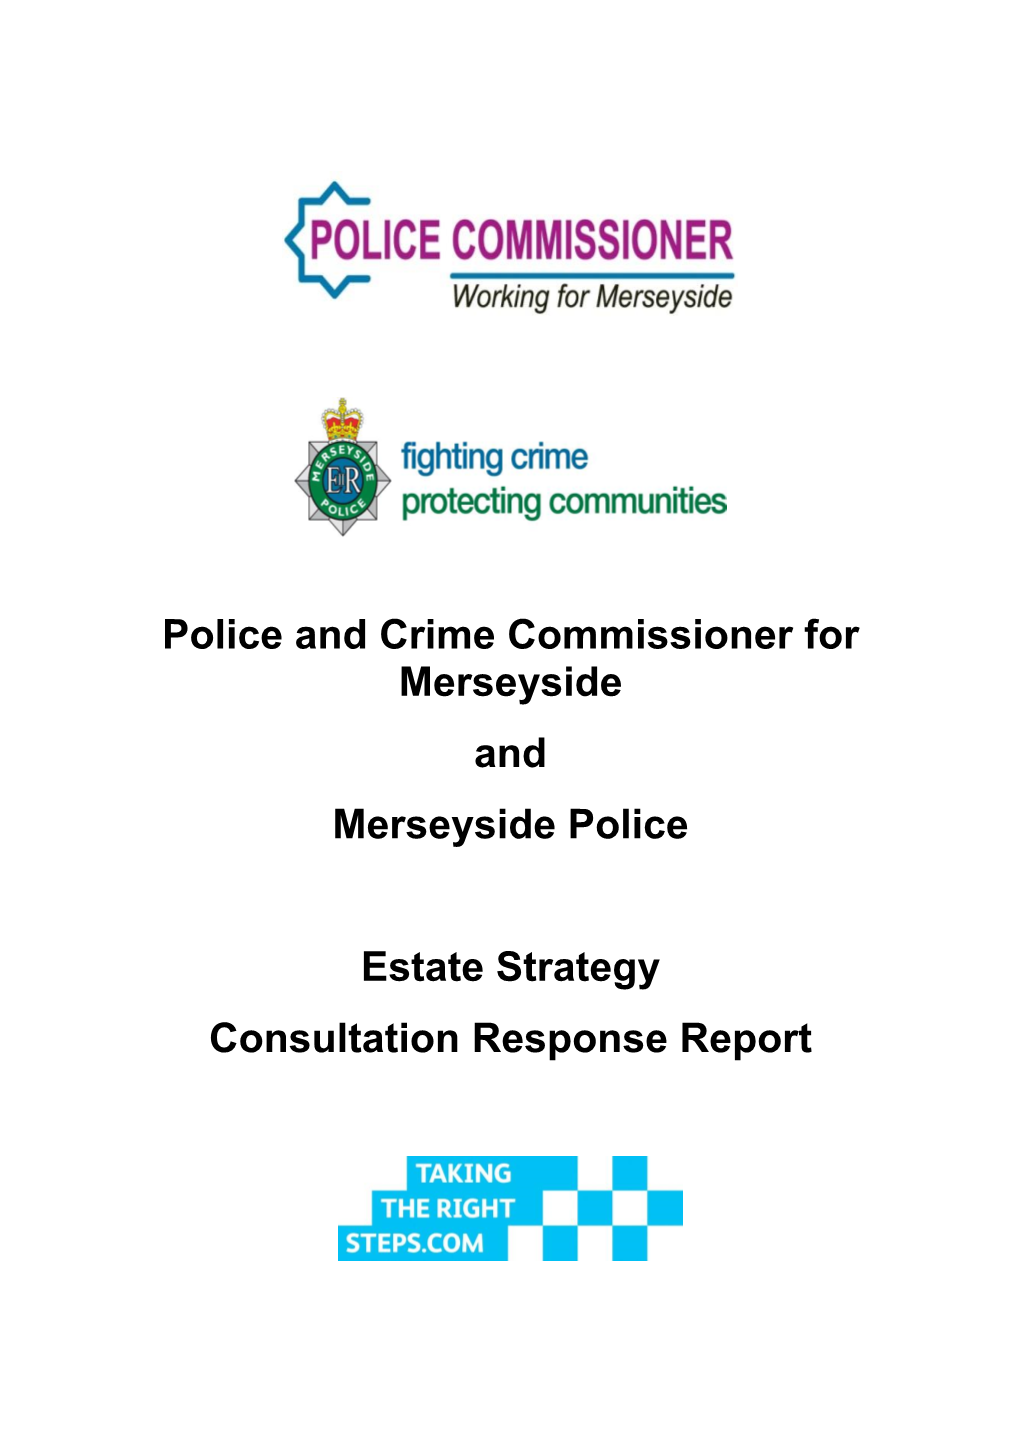 Police and Crime Commissioner for Merseyside and Merseyside Police